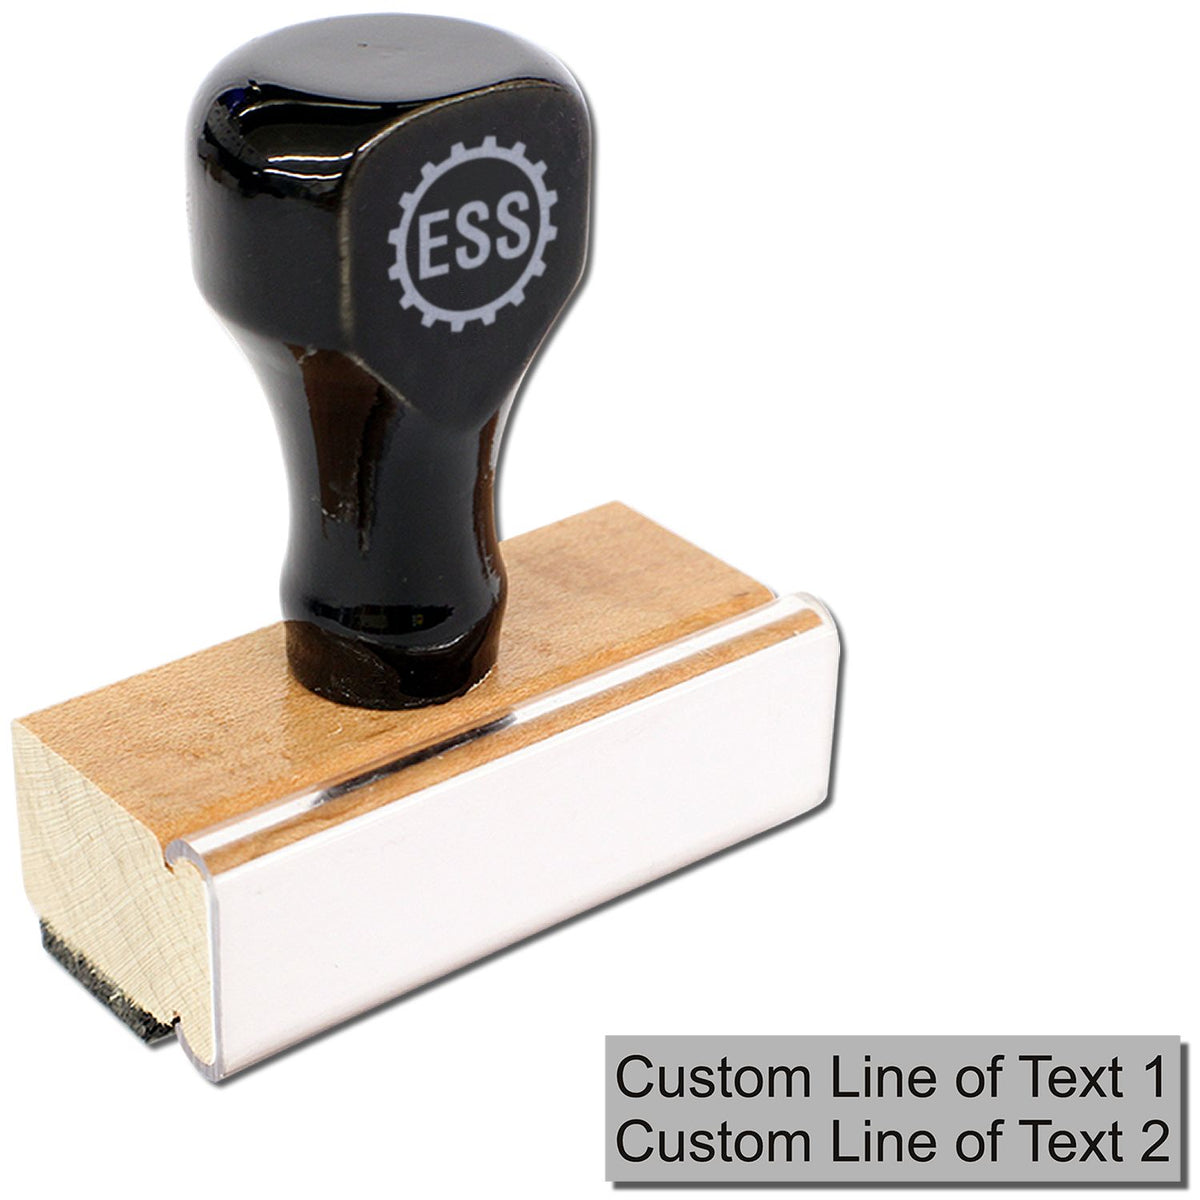 2 Line Custom Rubber Stamp with Wood Handle